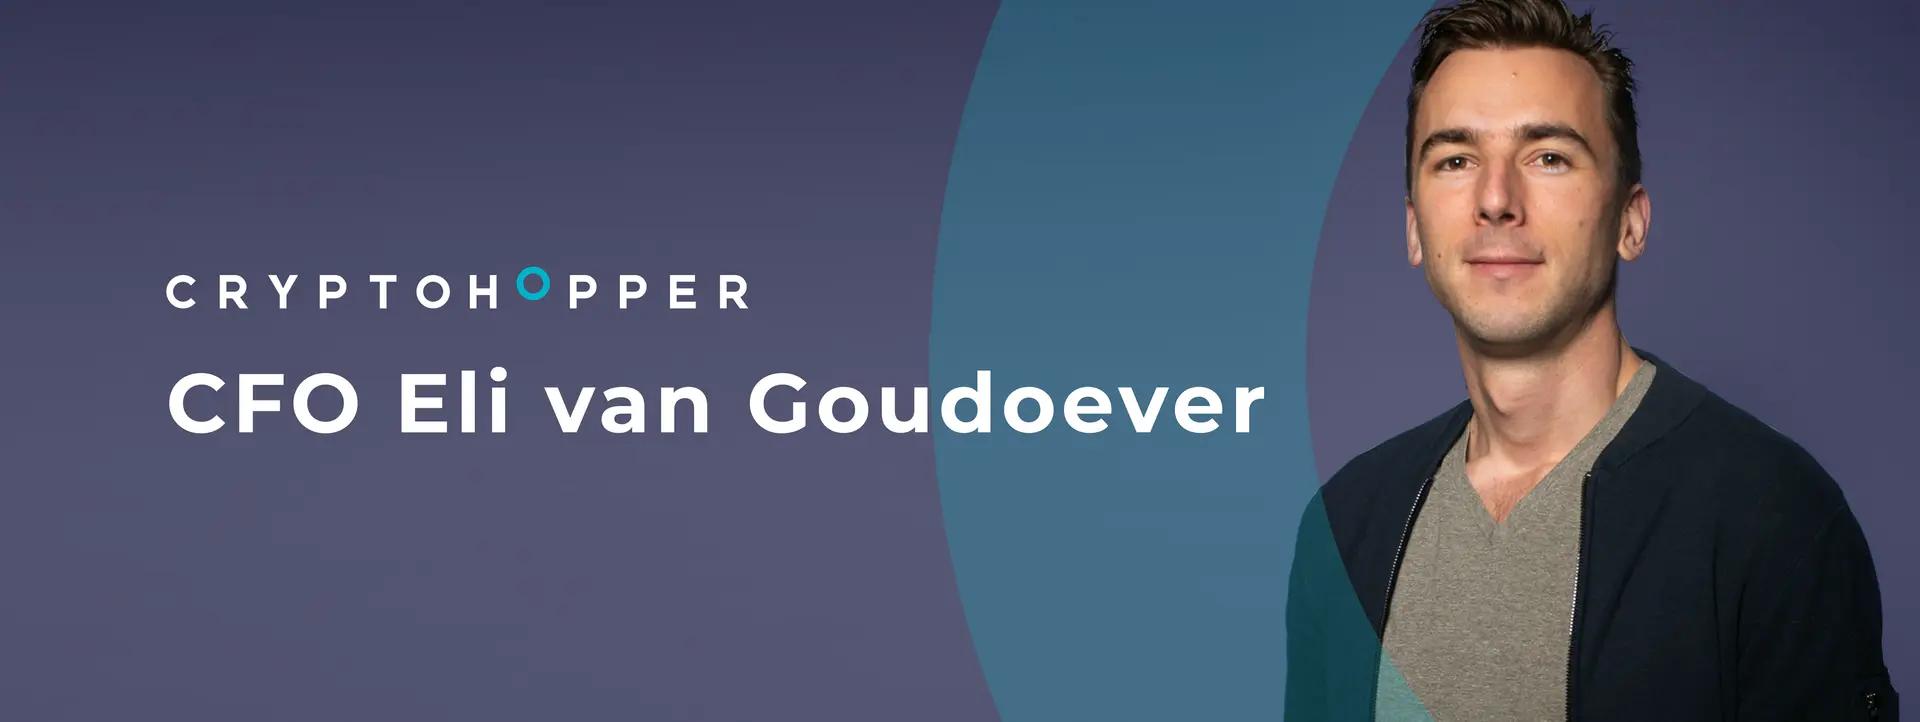 Trading bot Cryptohopper appoints experienced CFO Eli van Goudoever to target major investment and growth